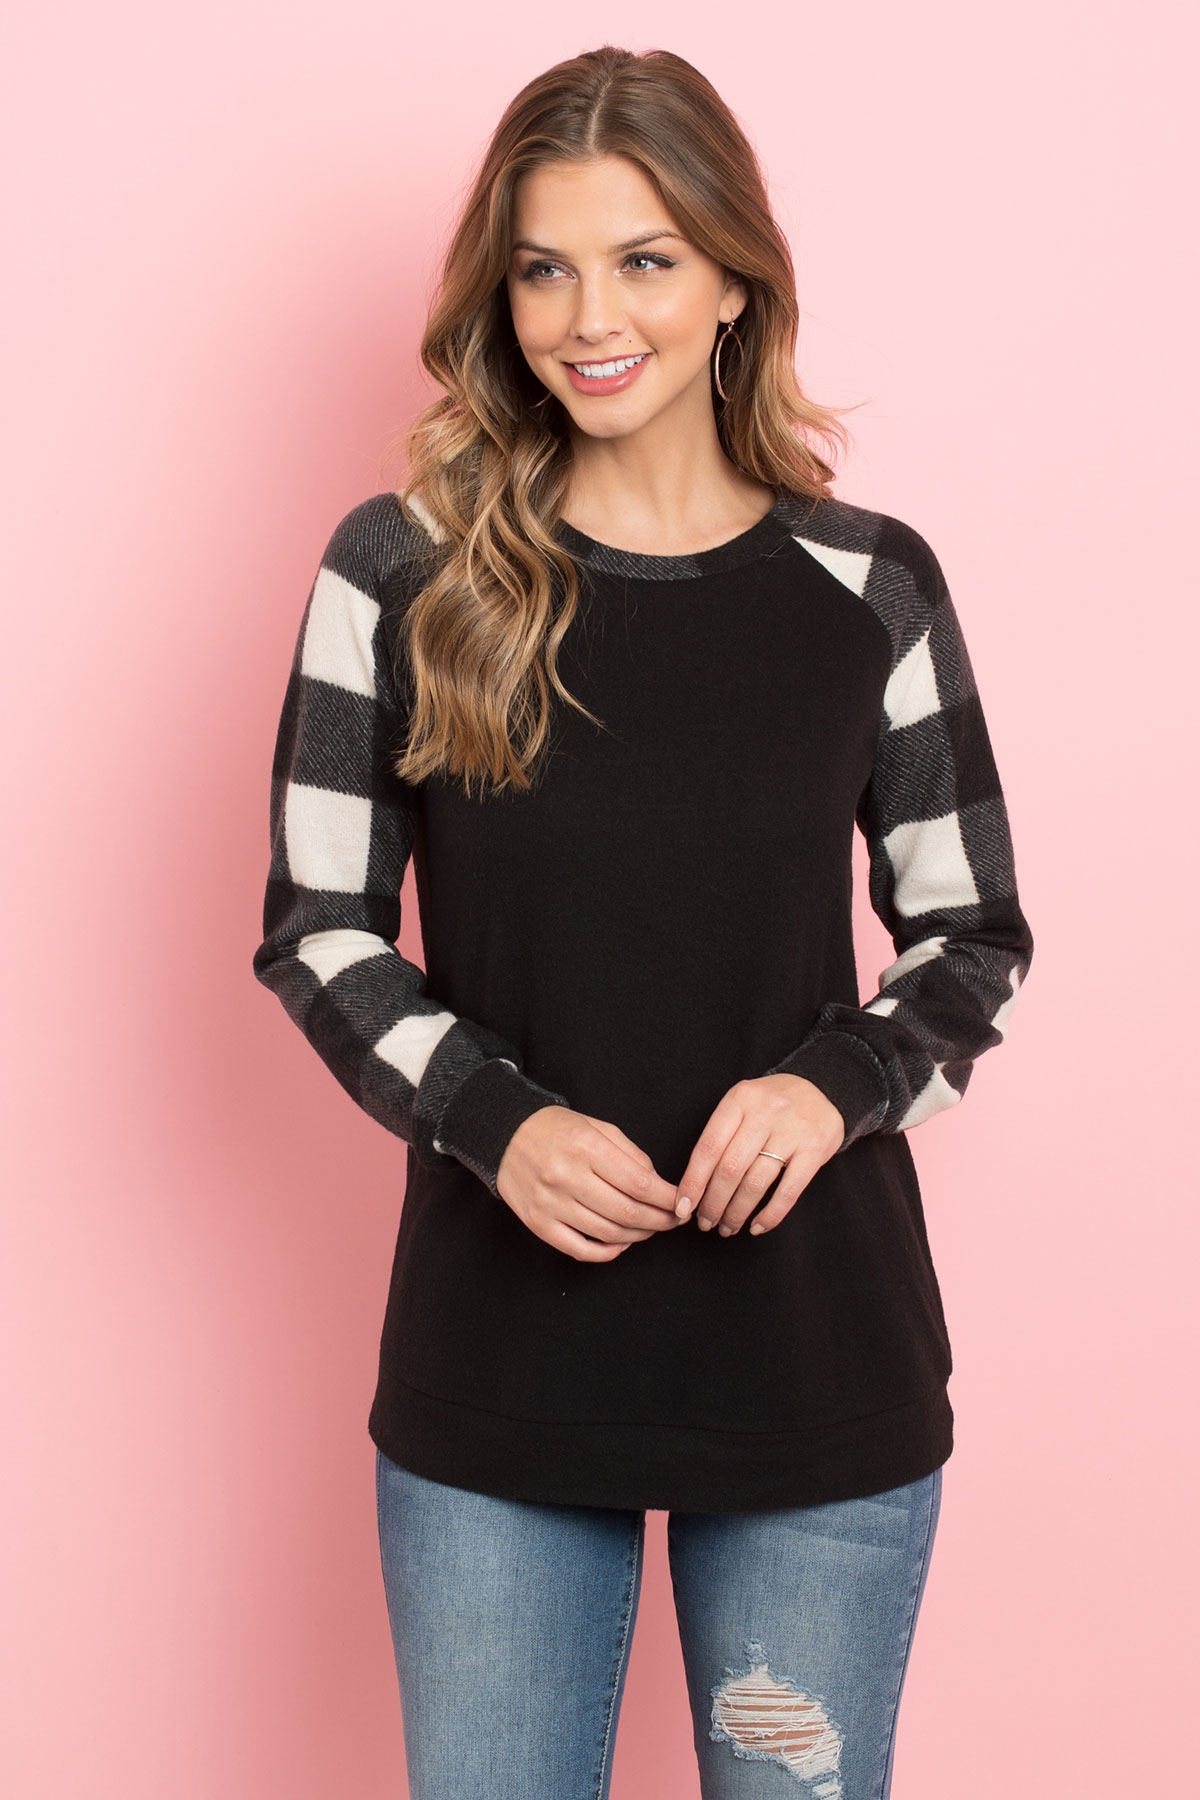 S7-1-4-PPT2120-BKIV - PLAID CONTRAST SLEEVES SOLID HACCI BRUSHED TOP- BLACK/IVORY 1-2-2-2